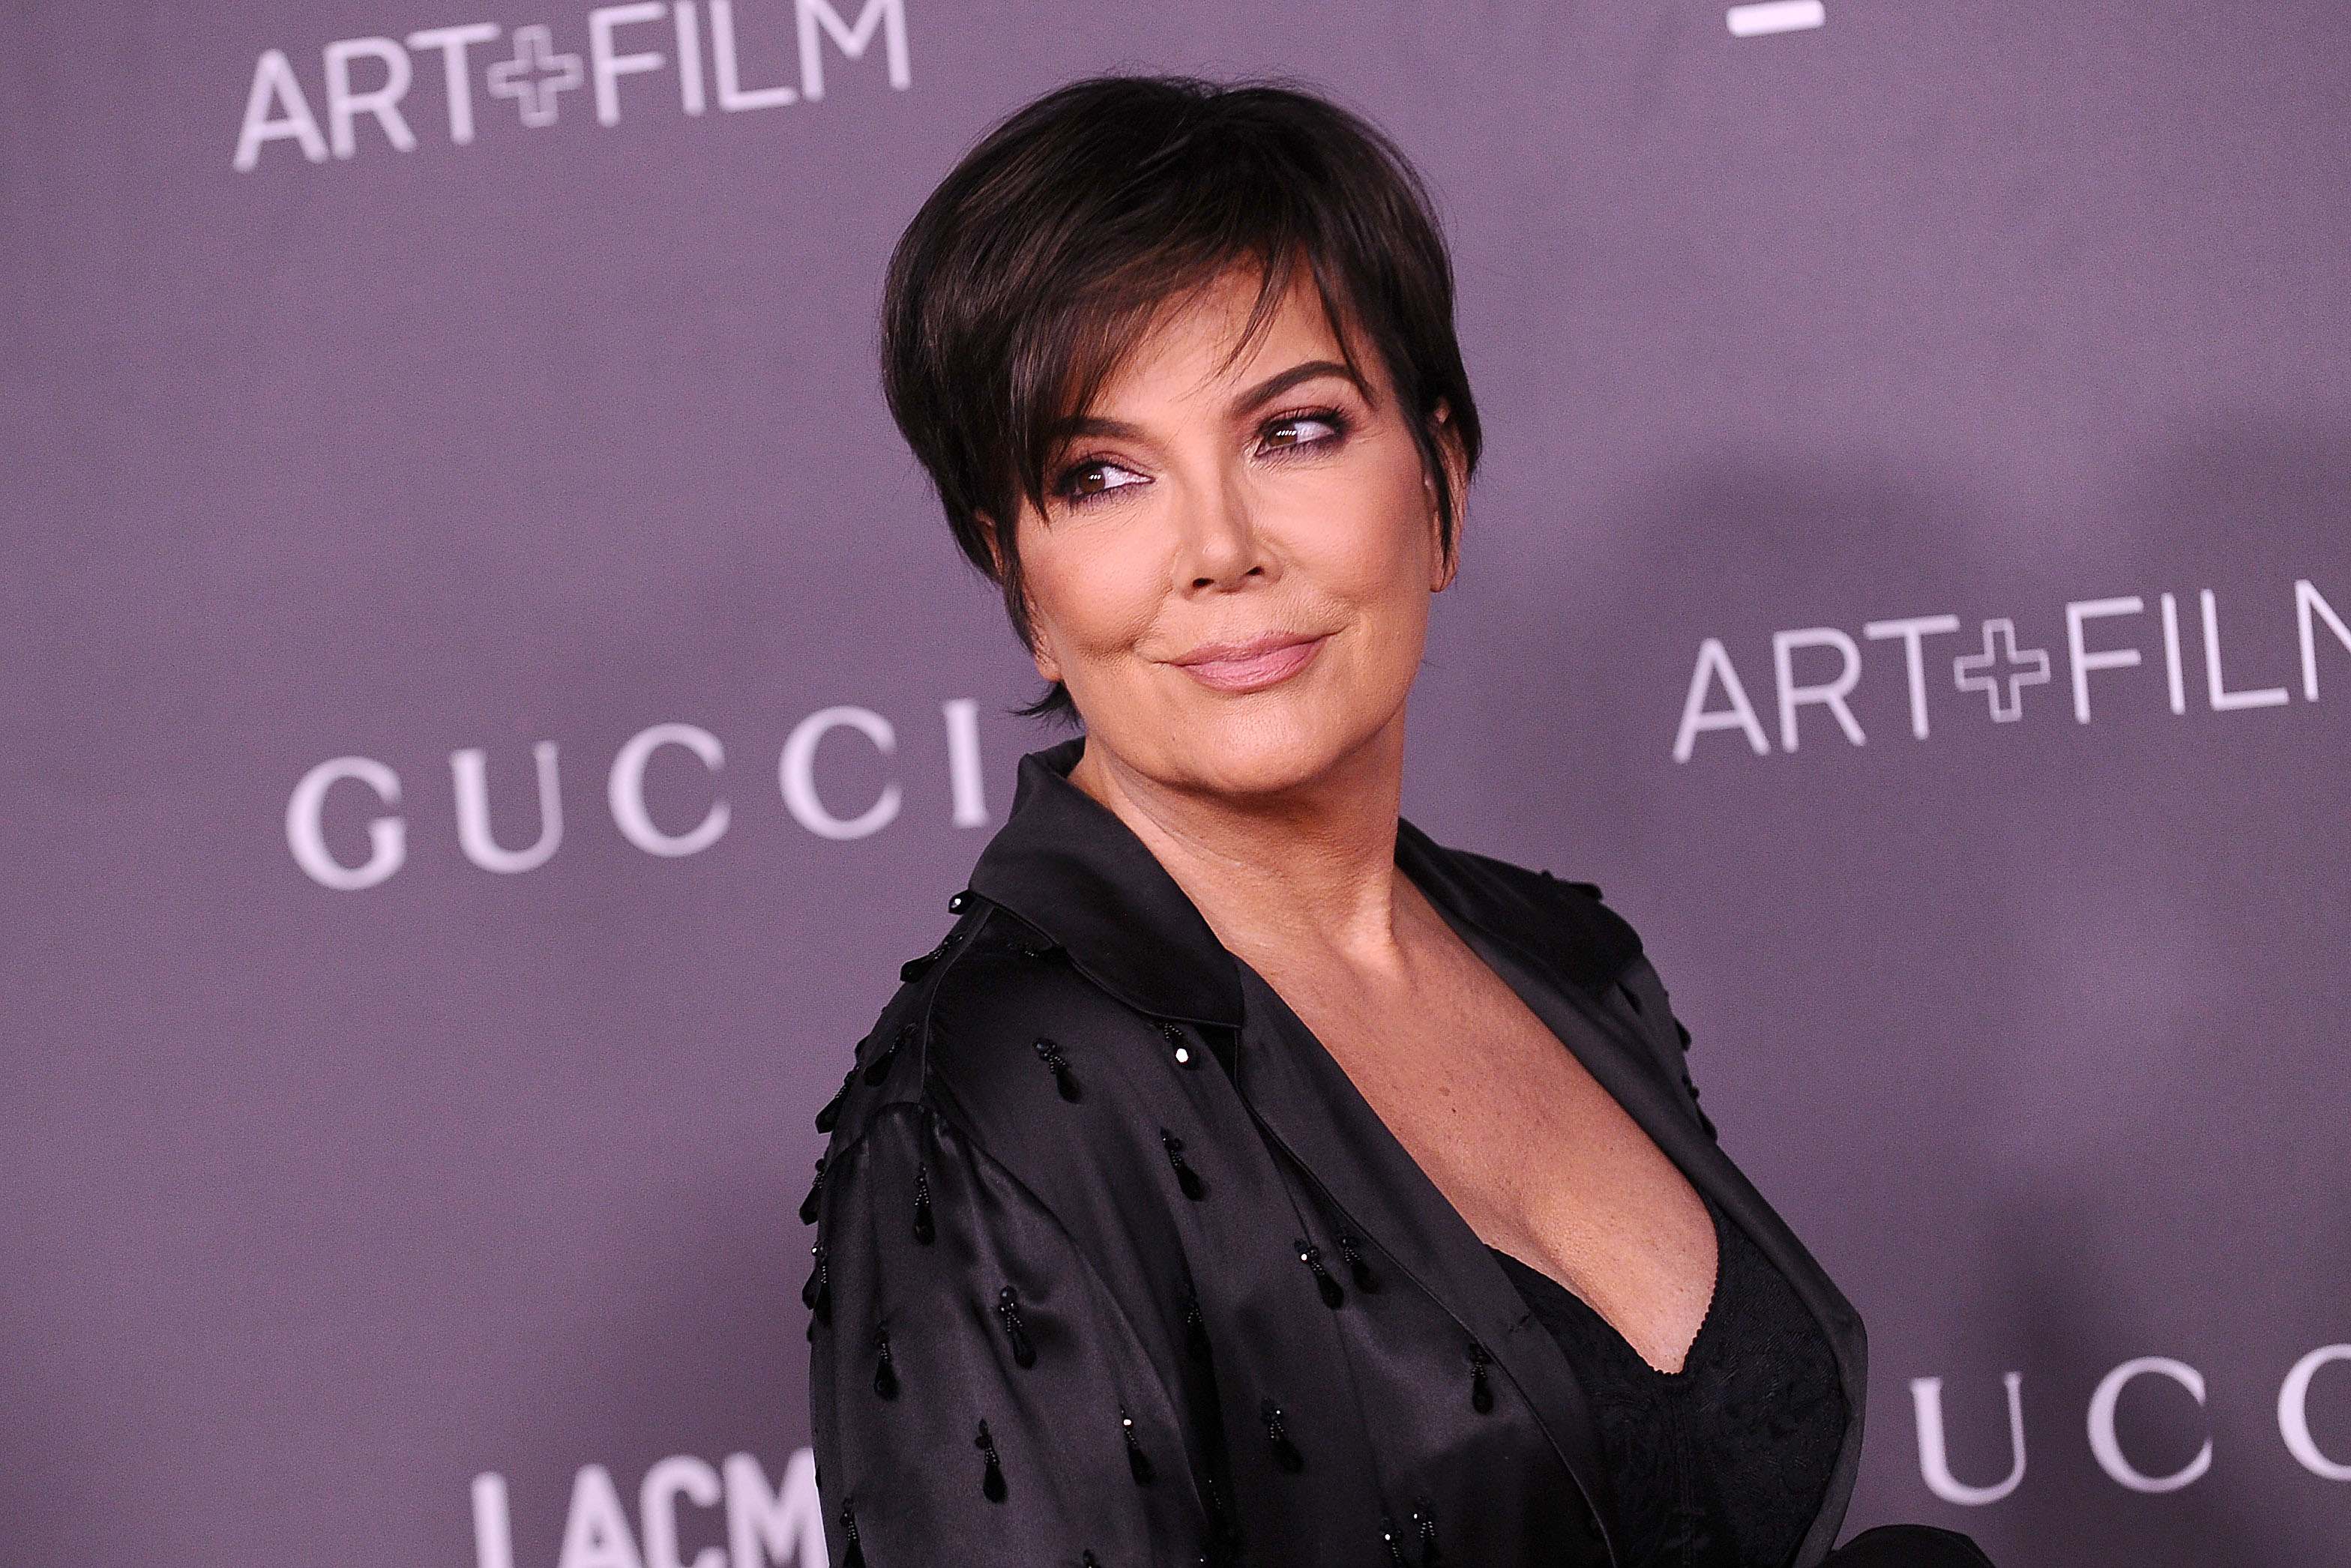 Kris Jenner poses for a photo on the red carpet at the LACMA Art + Film gala